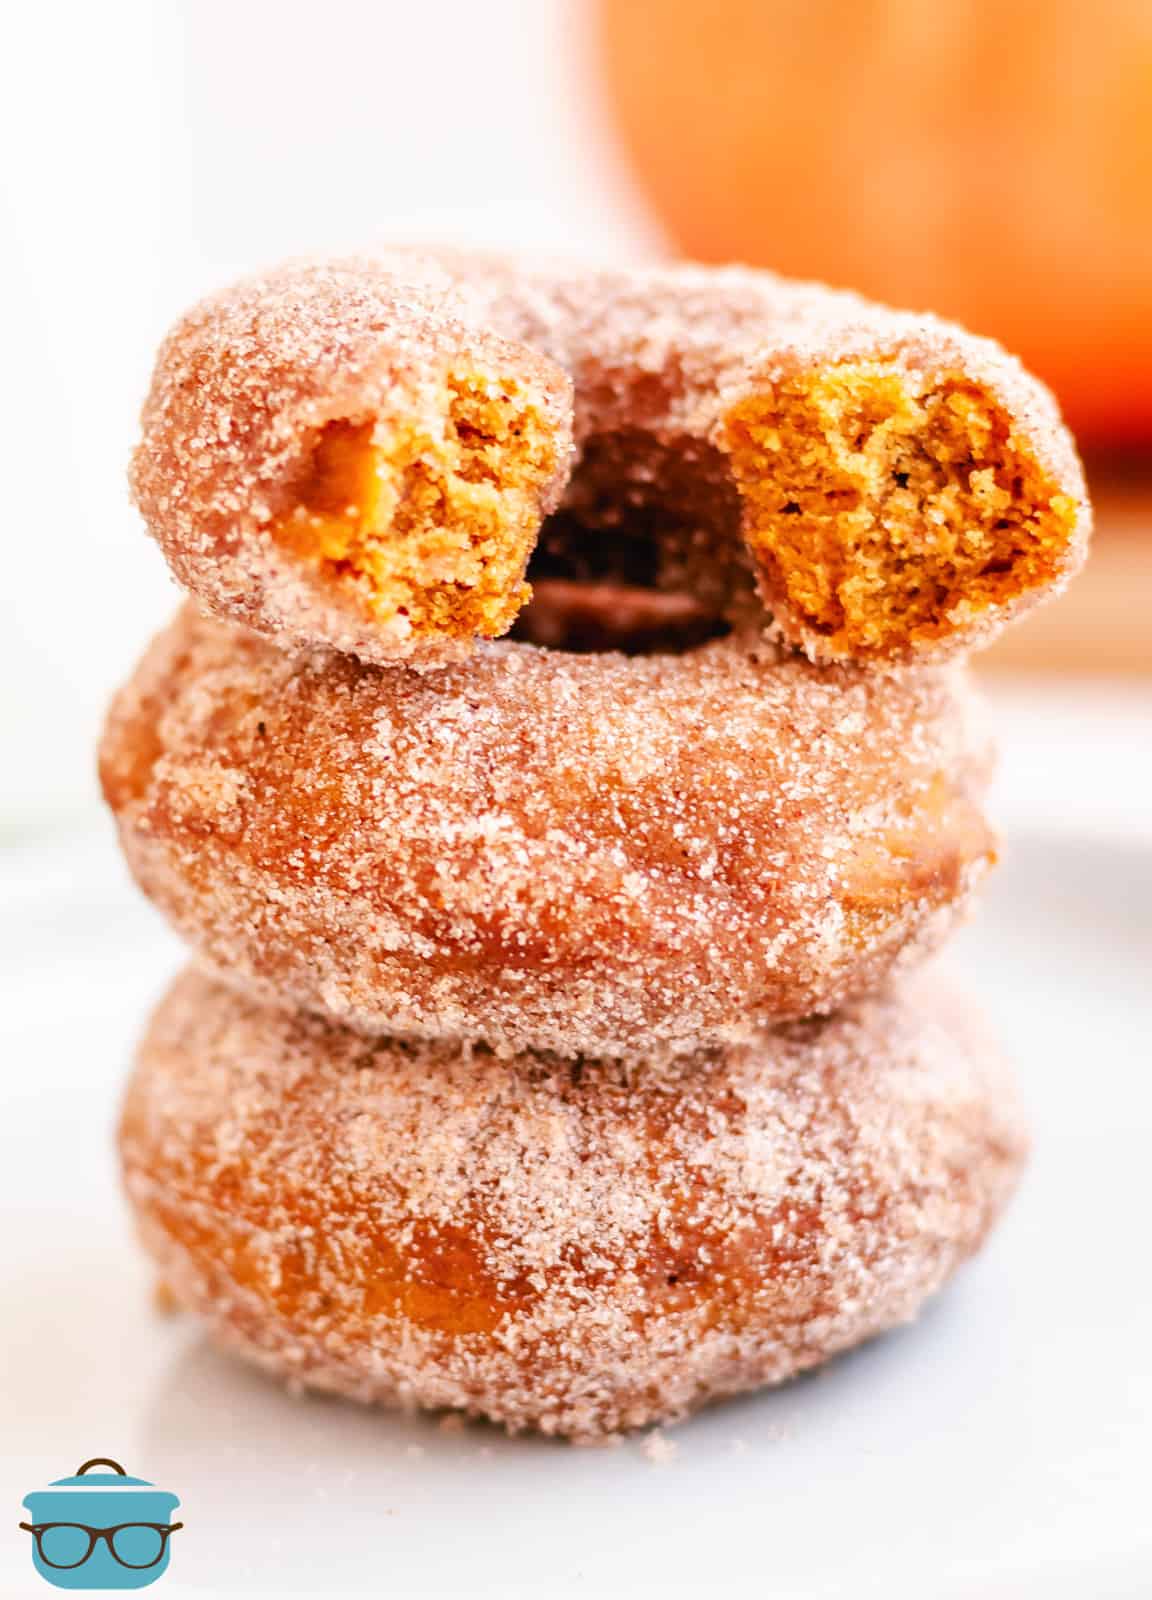 Three stacked Baked Pumpkin Donuts with top donut broken in half.